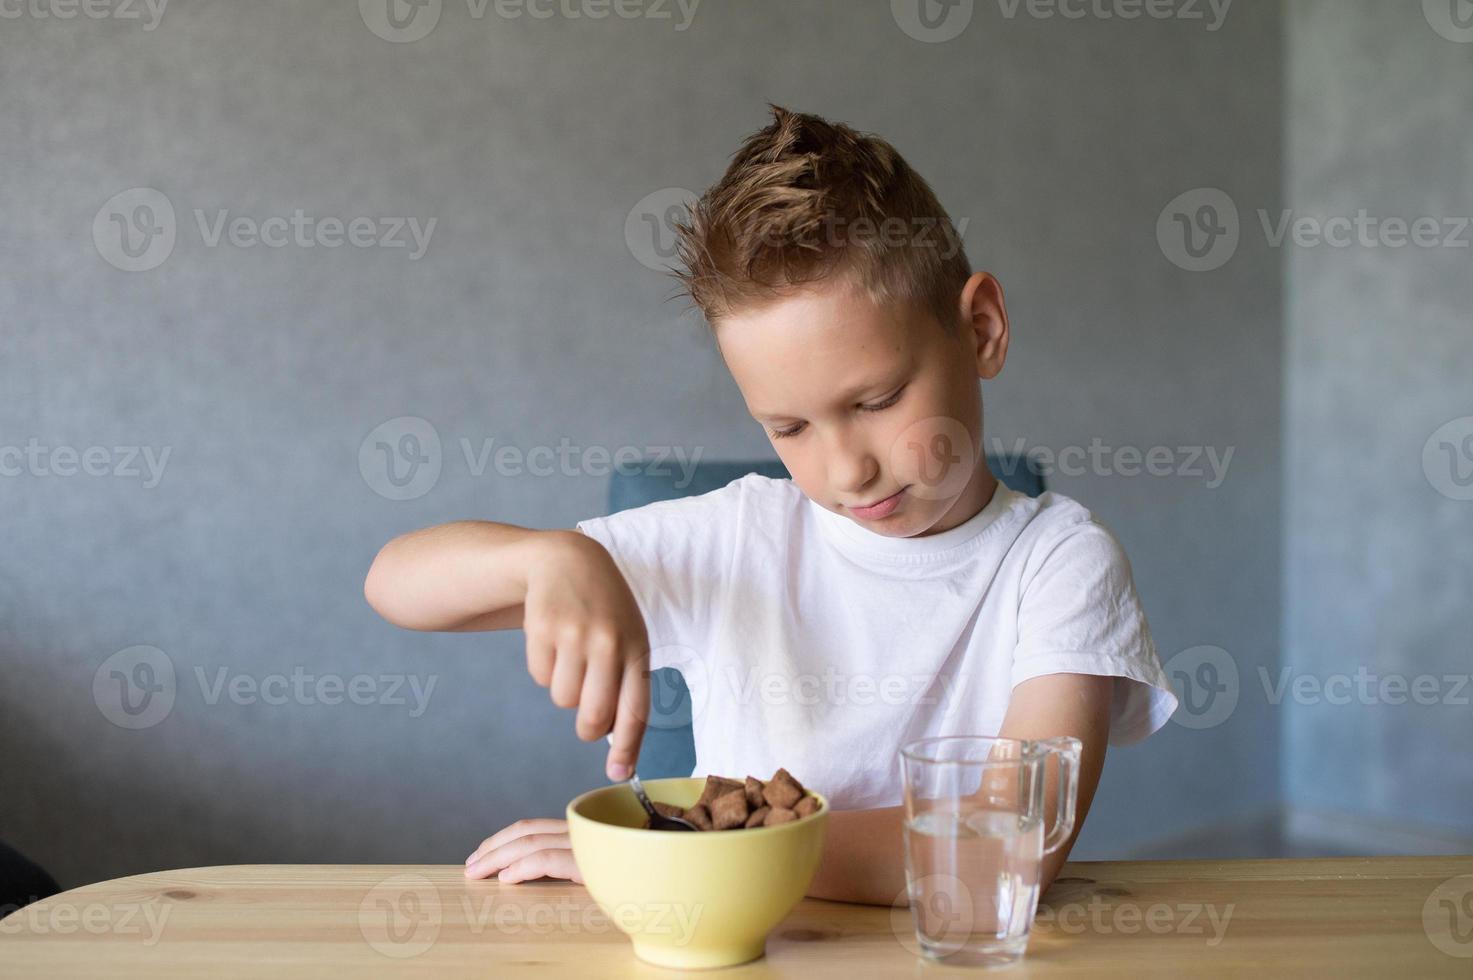 Cute boy eats a dry breakfast at home and smiles photo